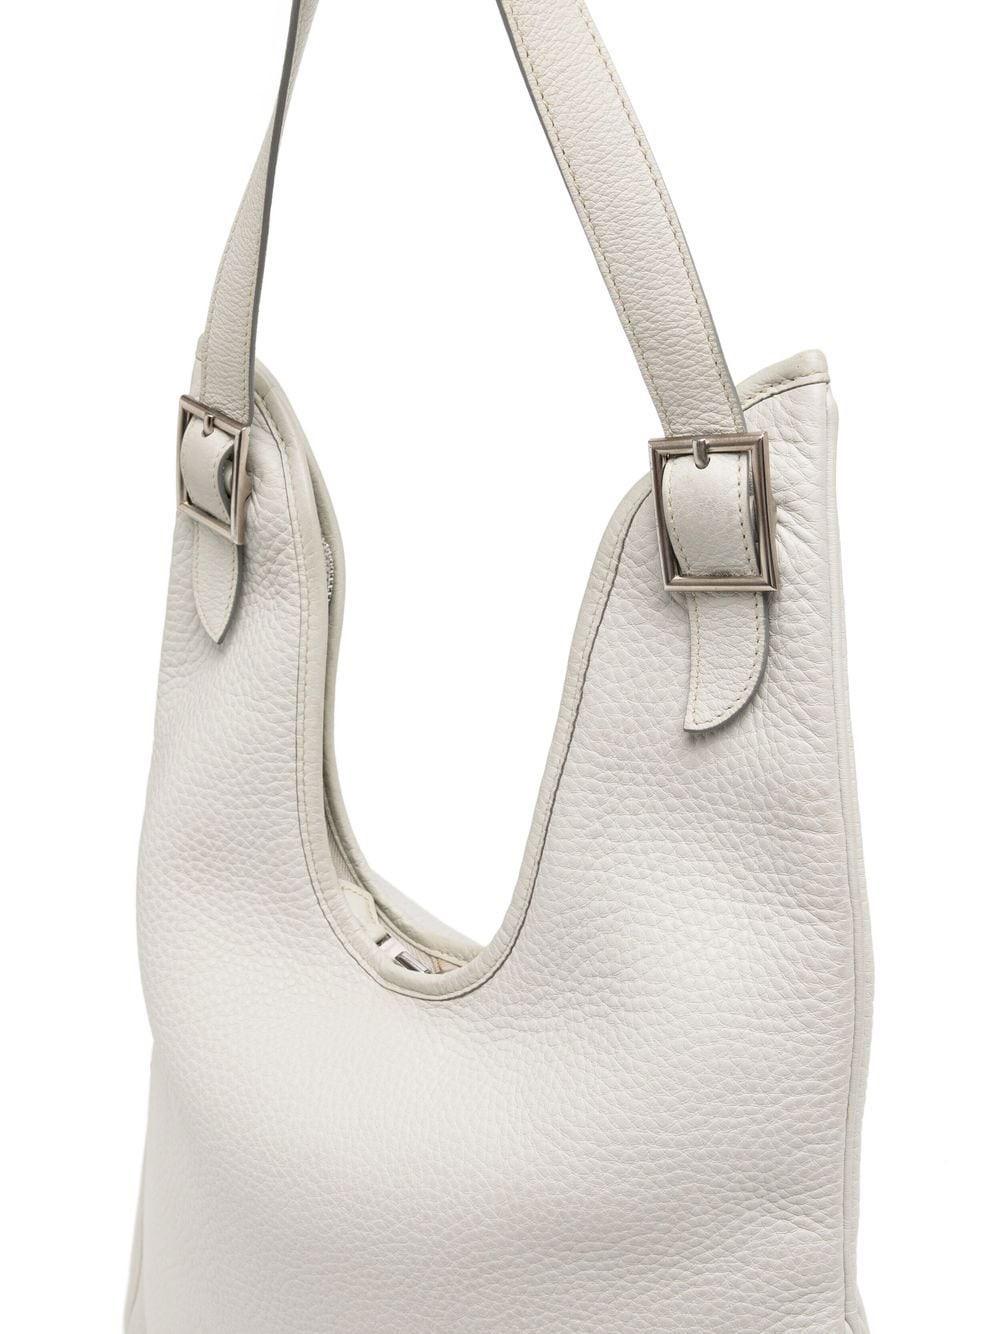 This Hermès Massai PM offers your luxury looks an air of effortless sophistication with its understated slouchy frame and neutral hue. Composed of a Pearl Grey Clemence (grained leather), this exceptional preloved Hermes handbag contrasts its